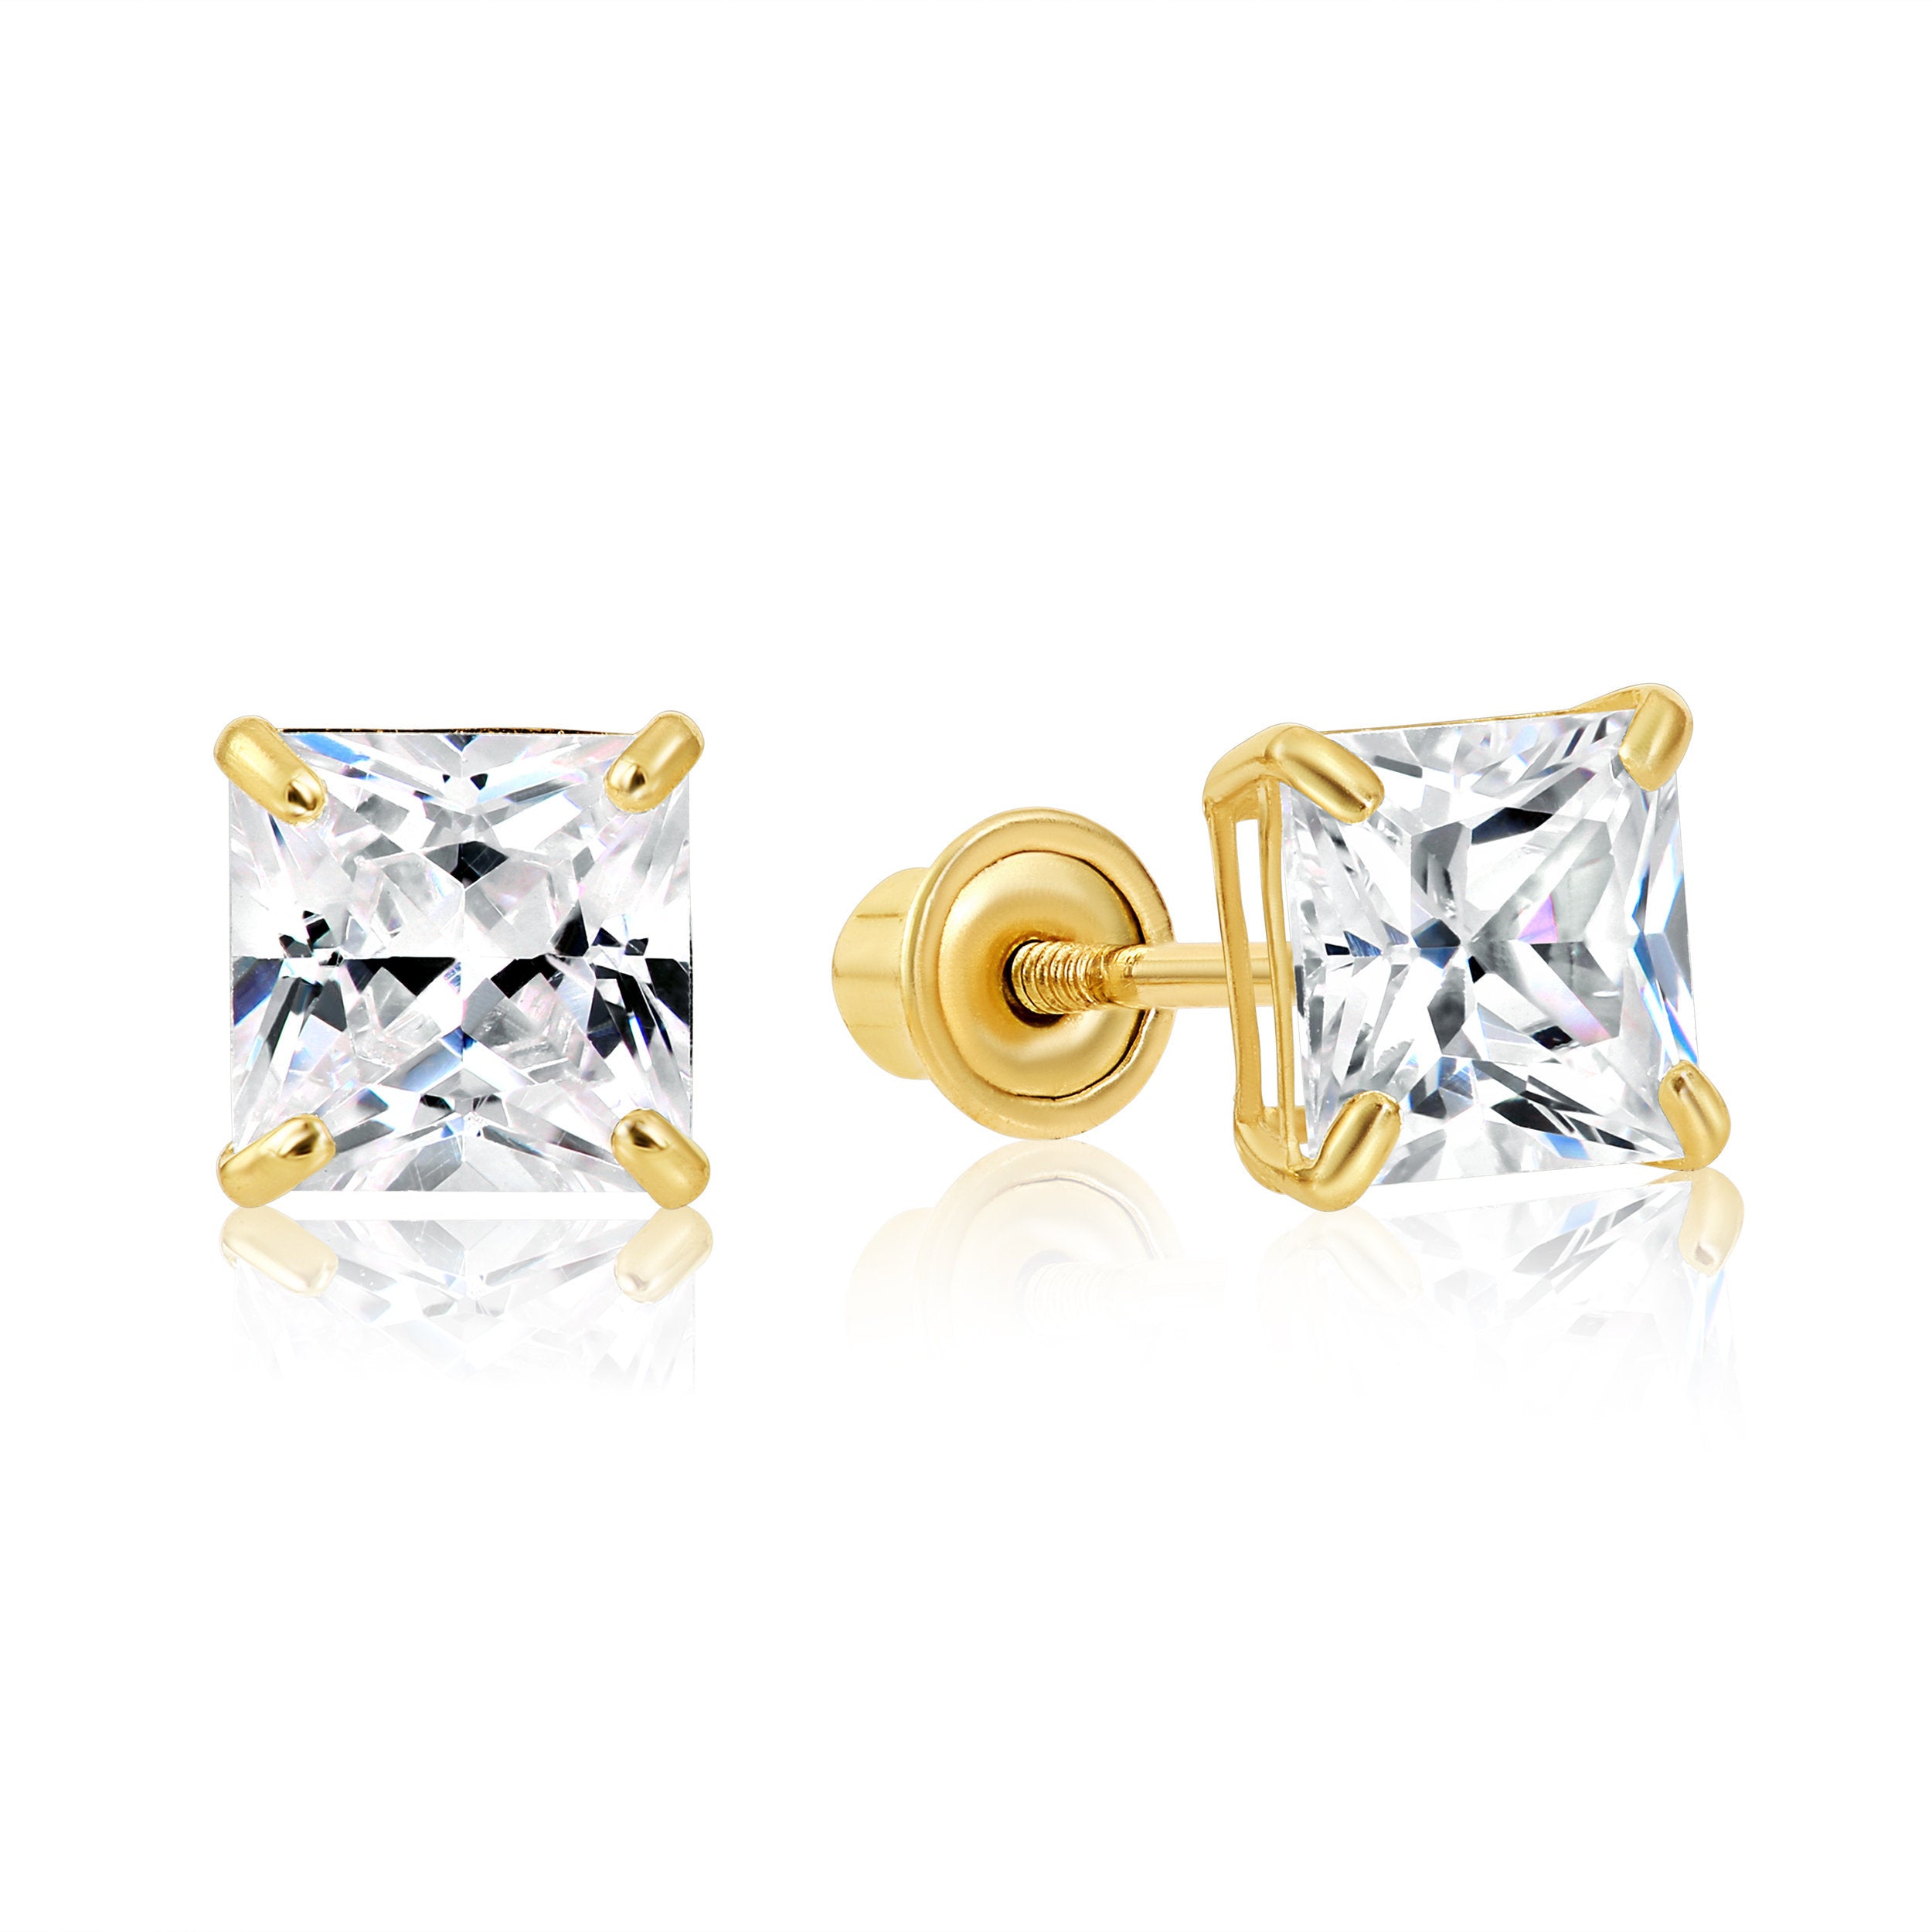 14k Yellow or White Gold Cubic Zirconia Stud Earrings with Safety Screwbacks 